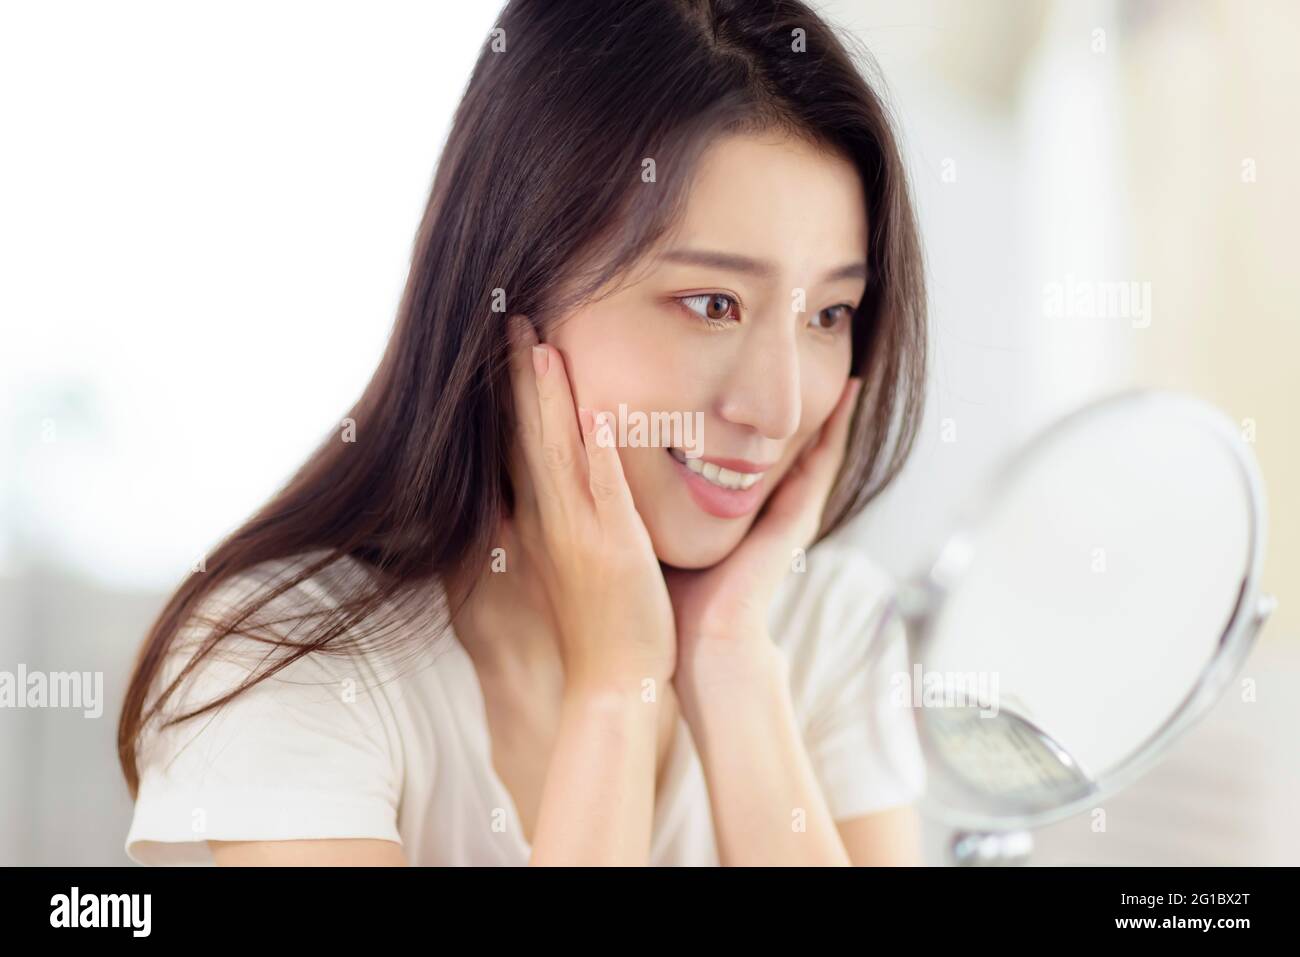 Asian young woman looking at her face in mirror Stock Photo